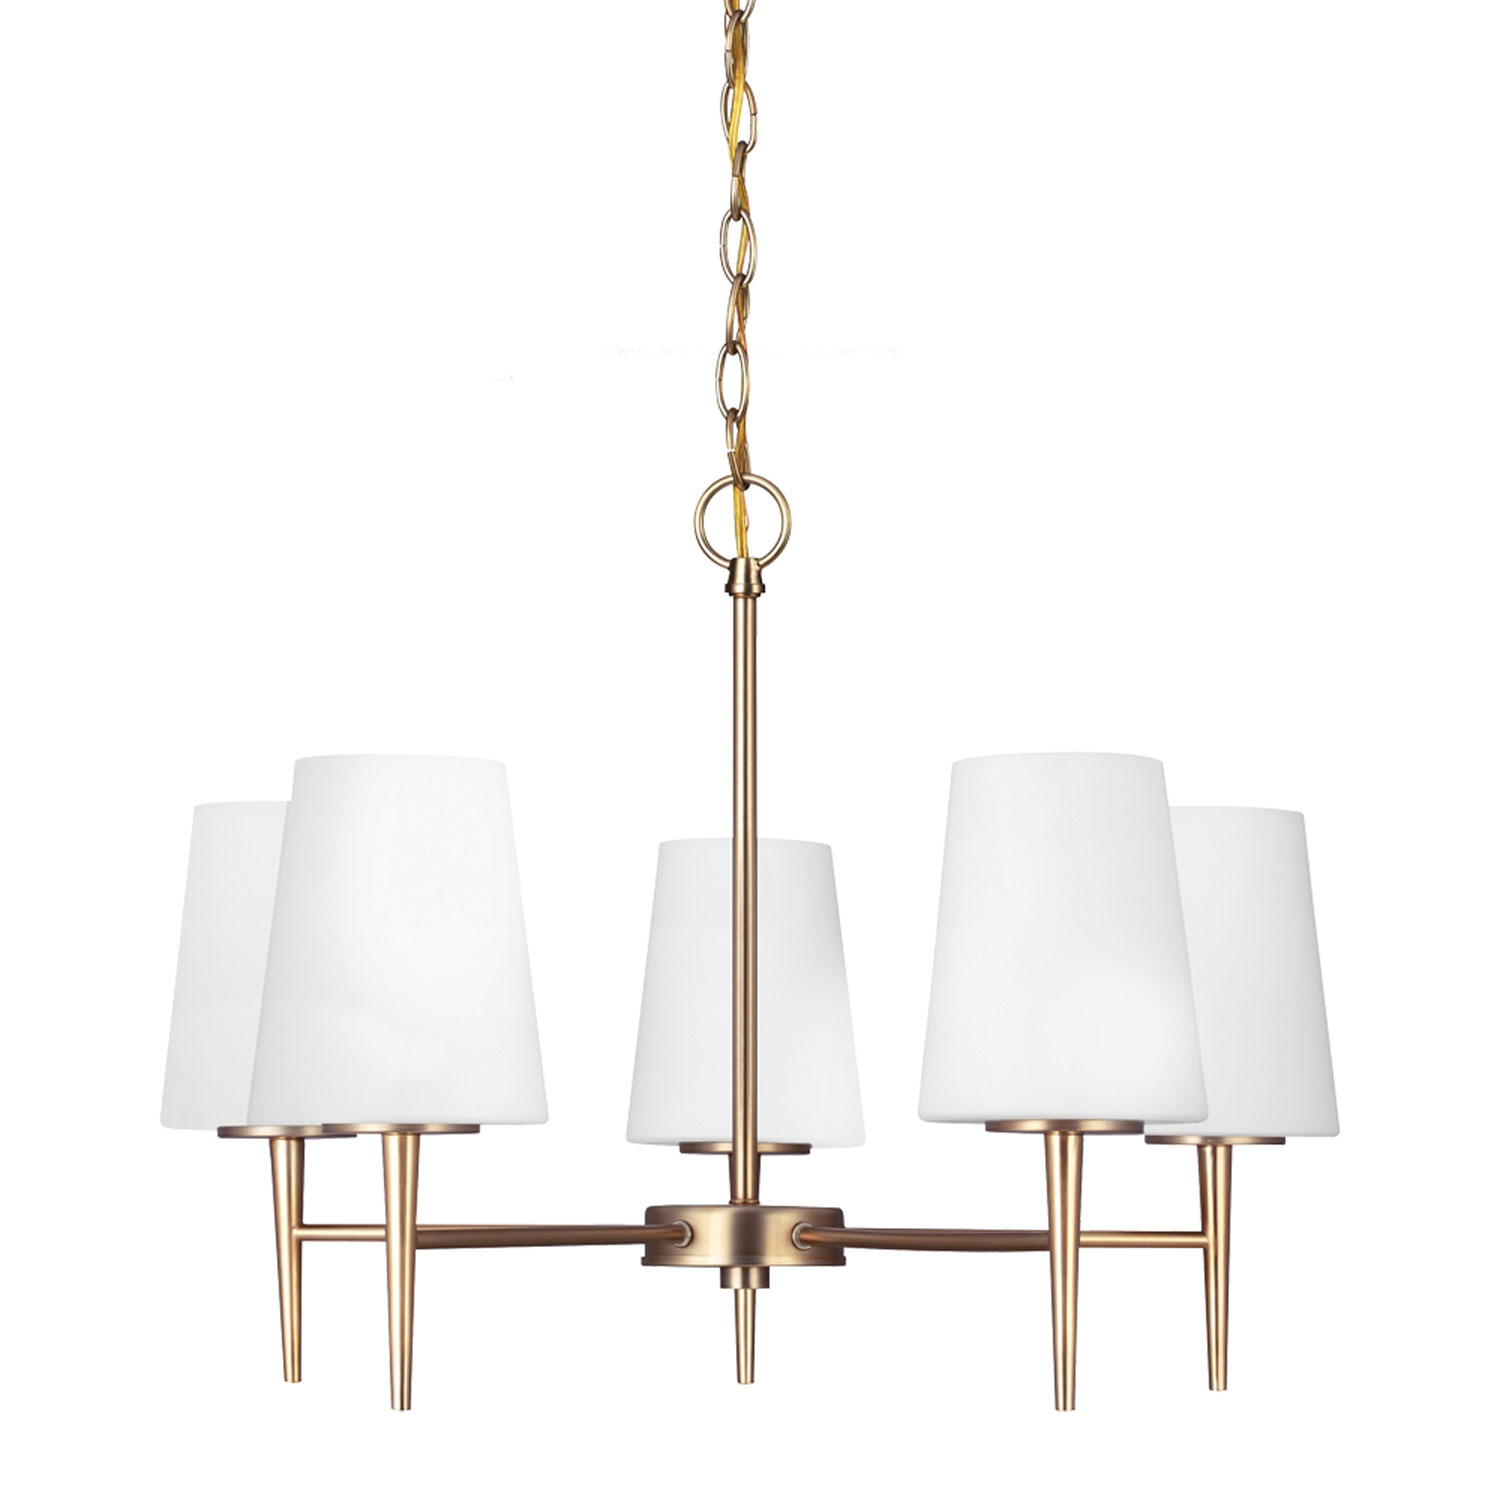 Sea Gull Lighting Four-Light Bound Glass Ceiling in Polished Brass 7662-02 